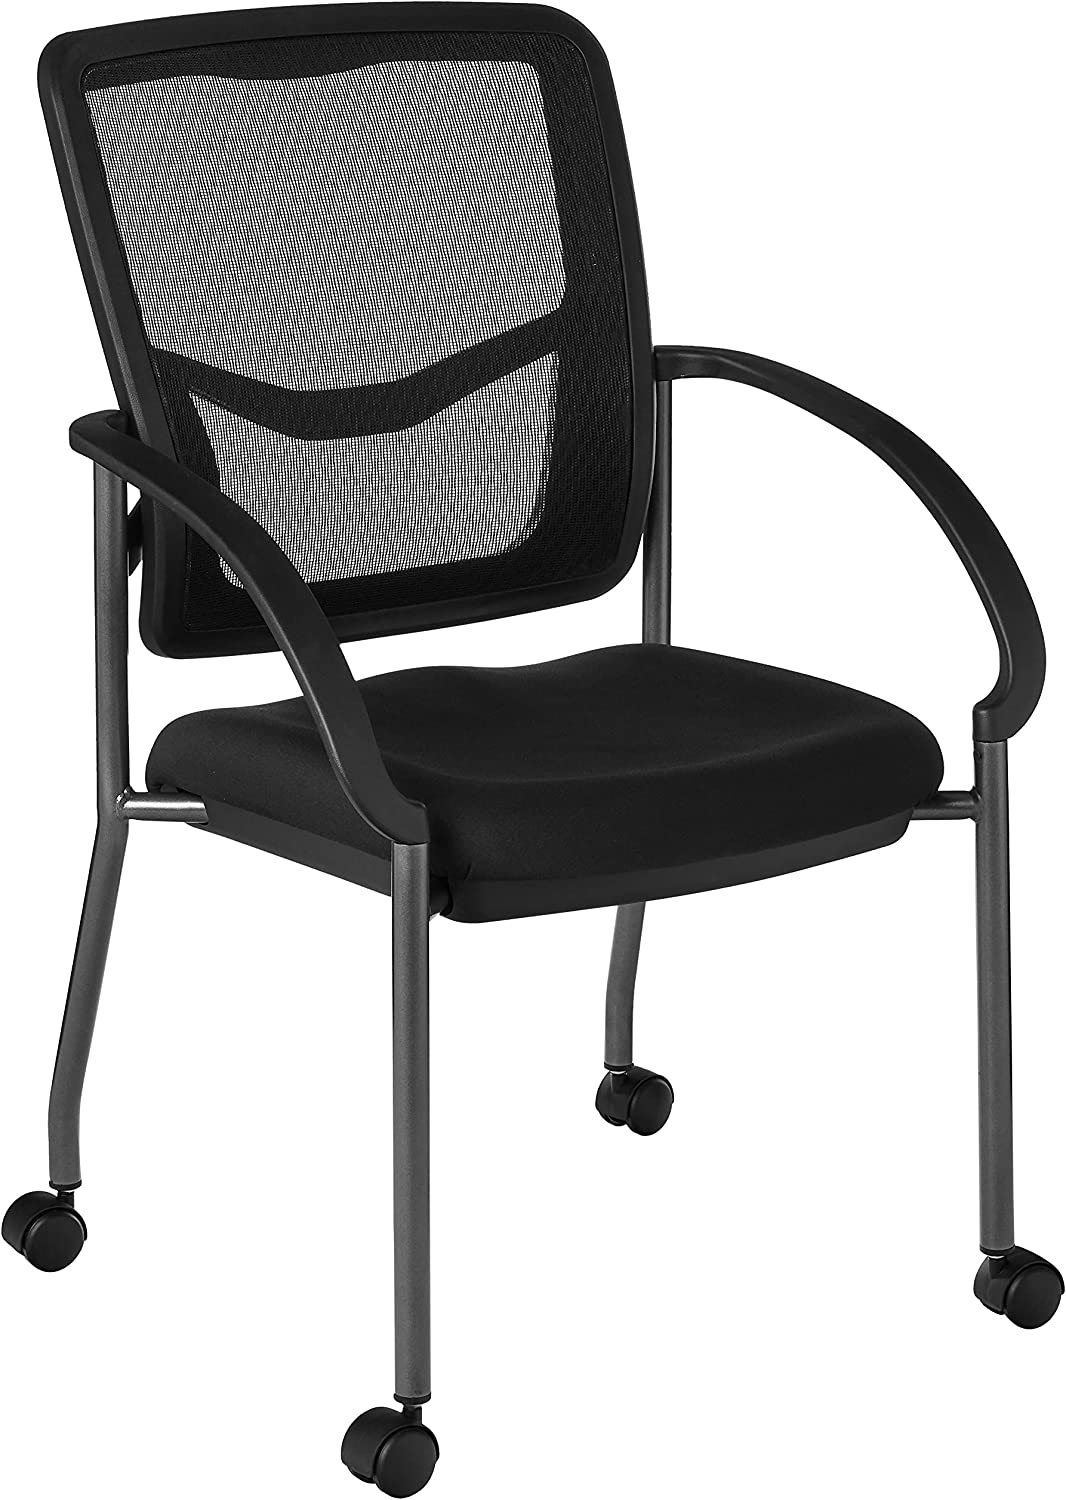 Office Star Visitors Chair with casters $82.43